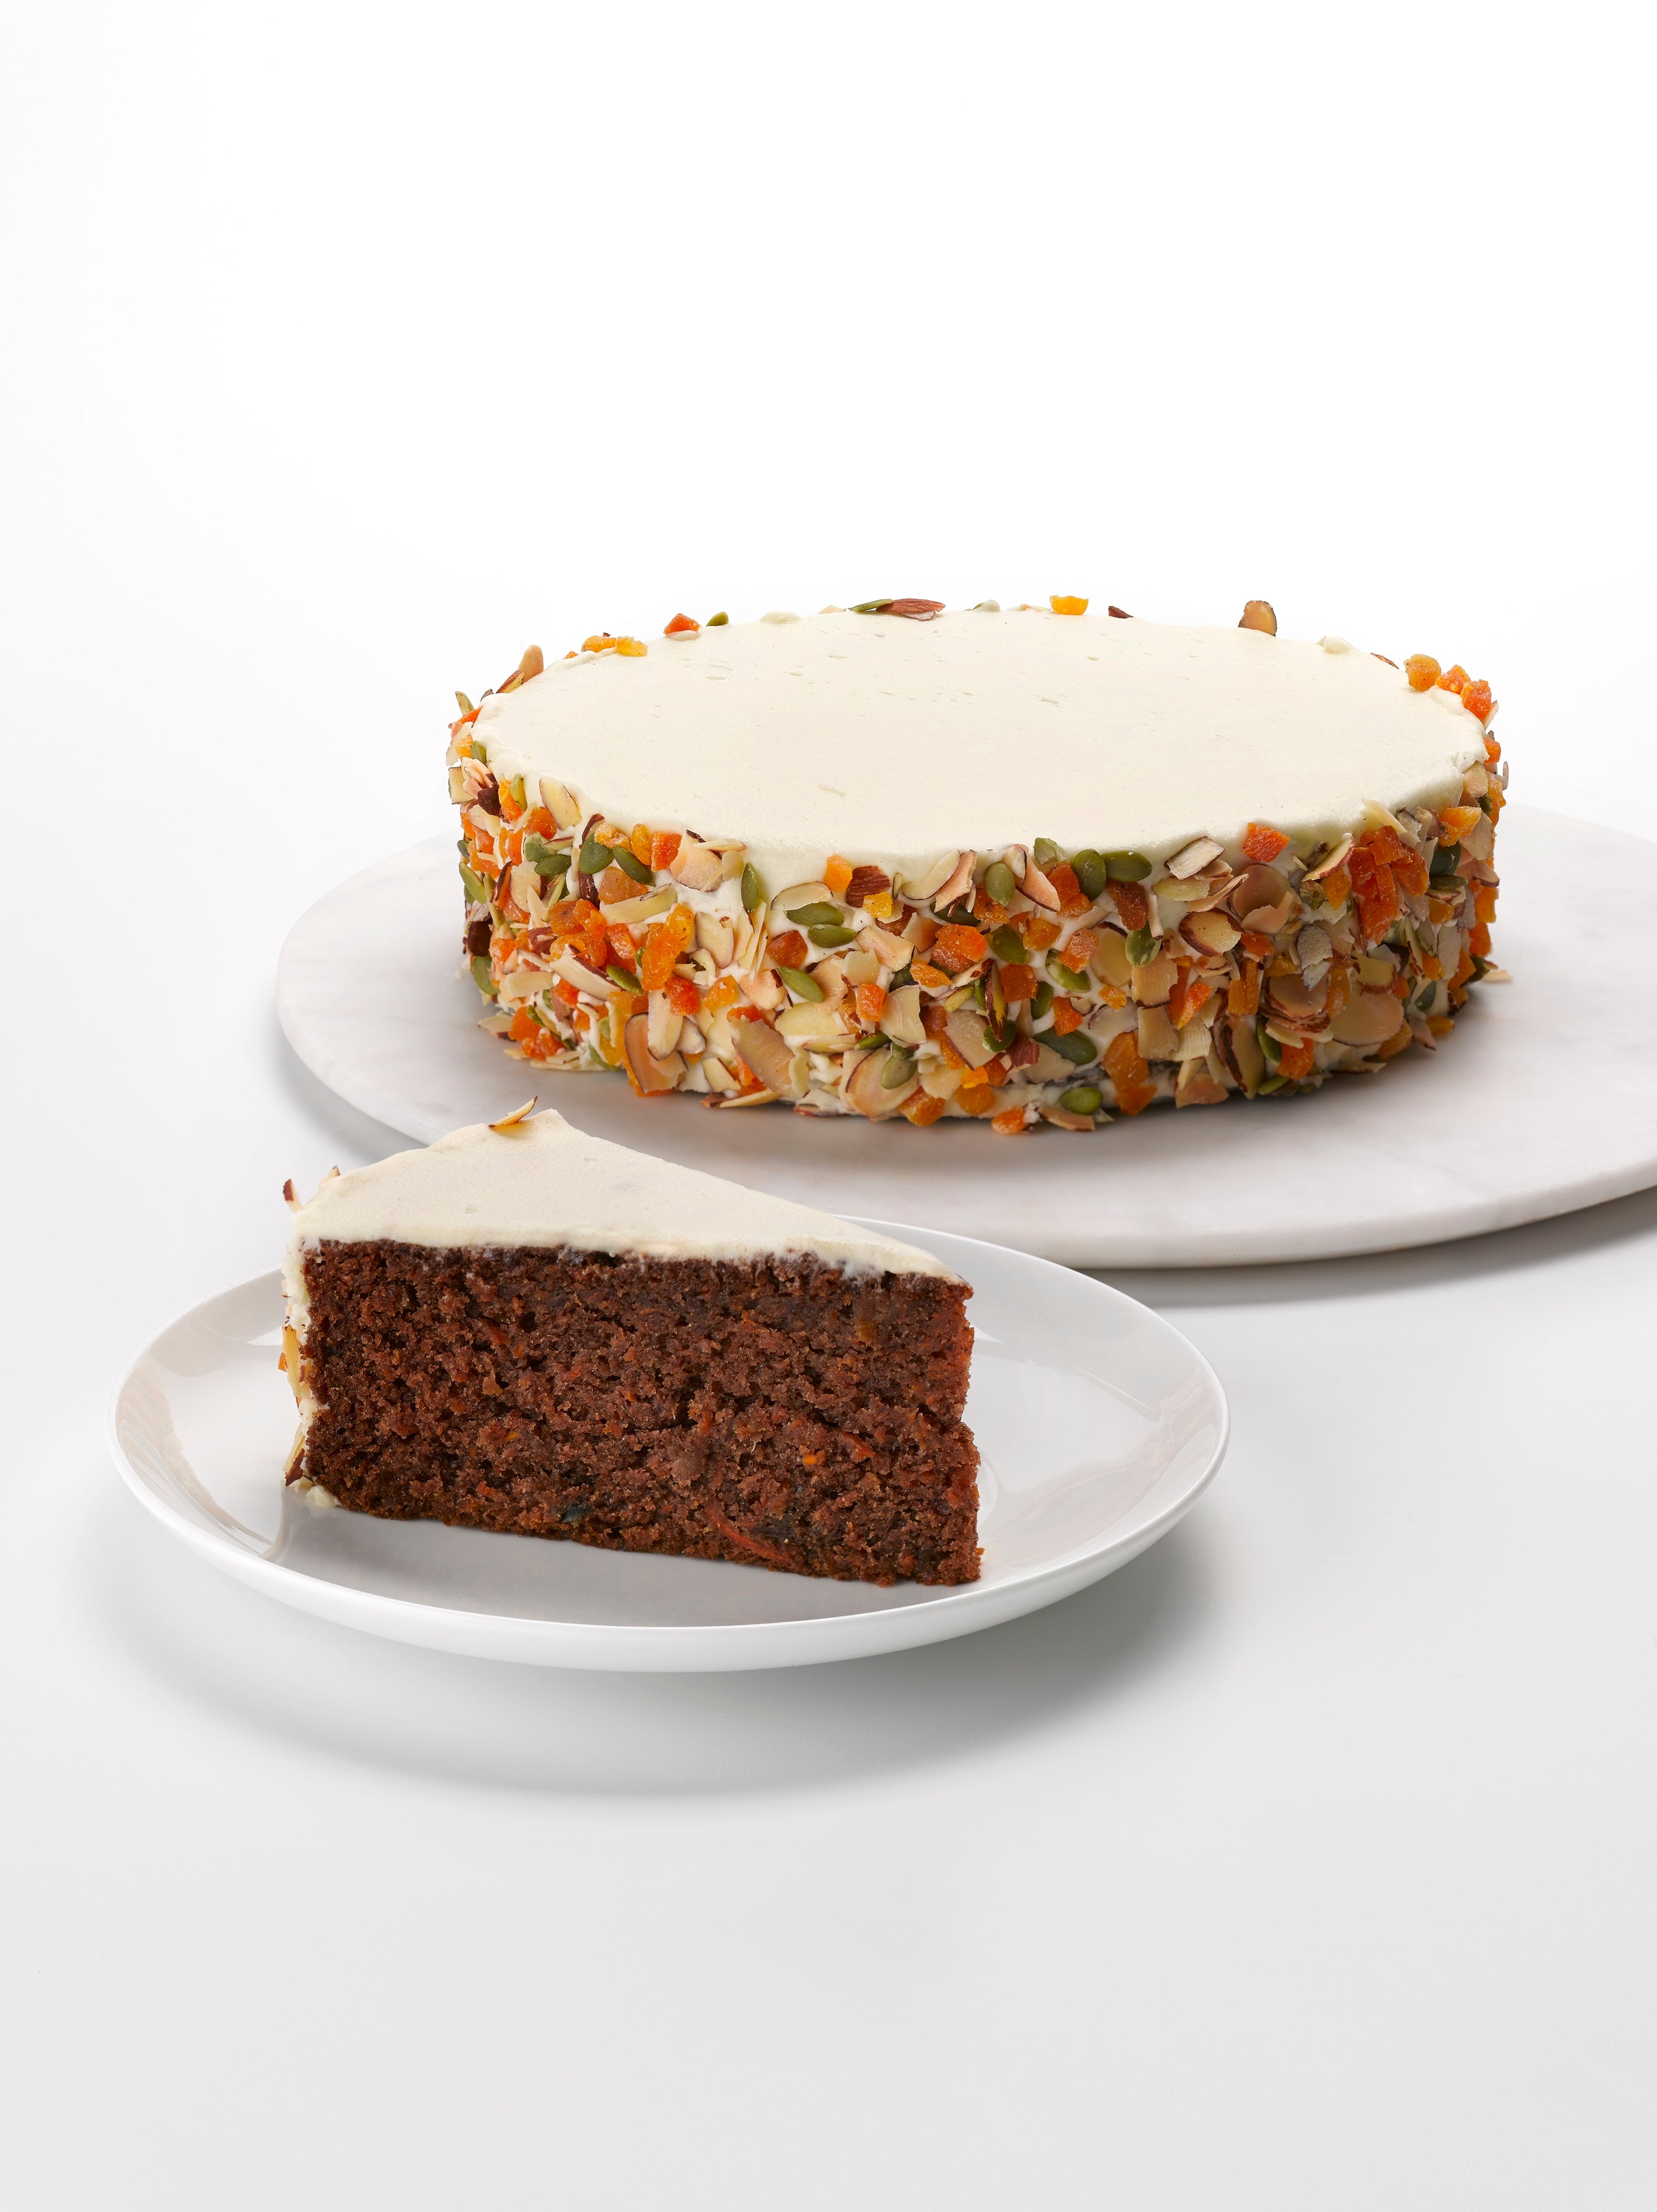 Keto Carrot Cake (Low Carb, Sugar Free Recipe!) | The Picky Eater